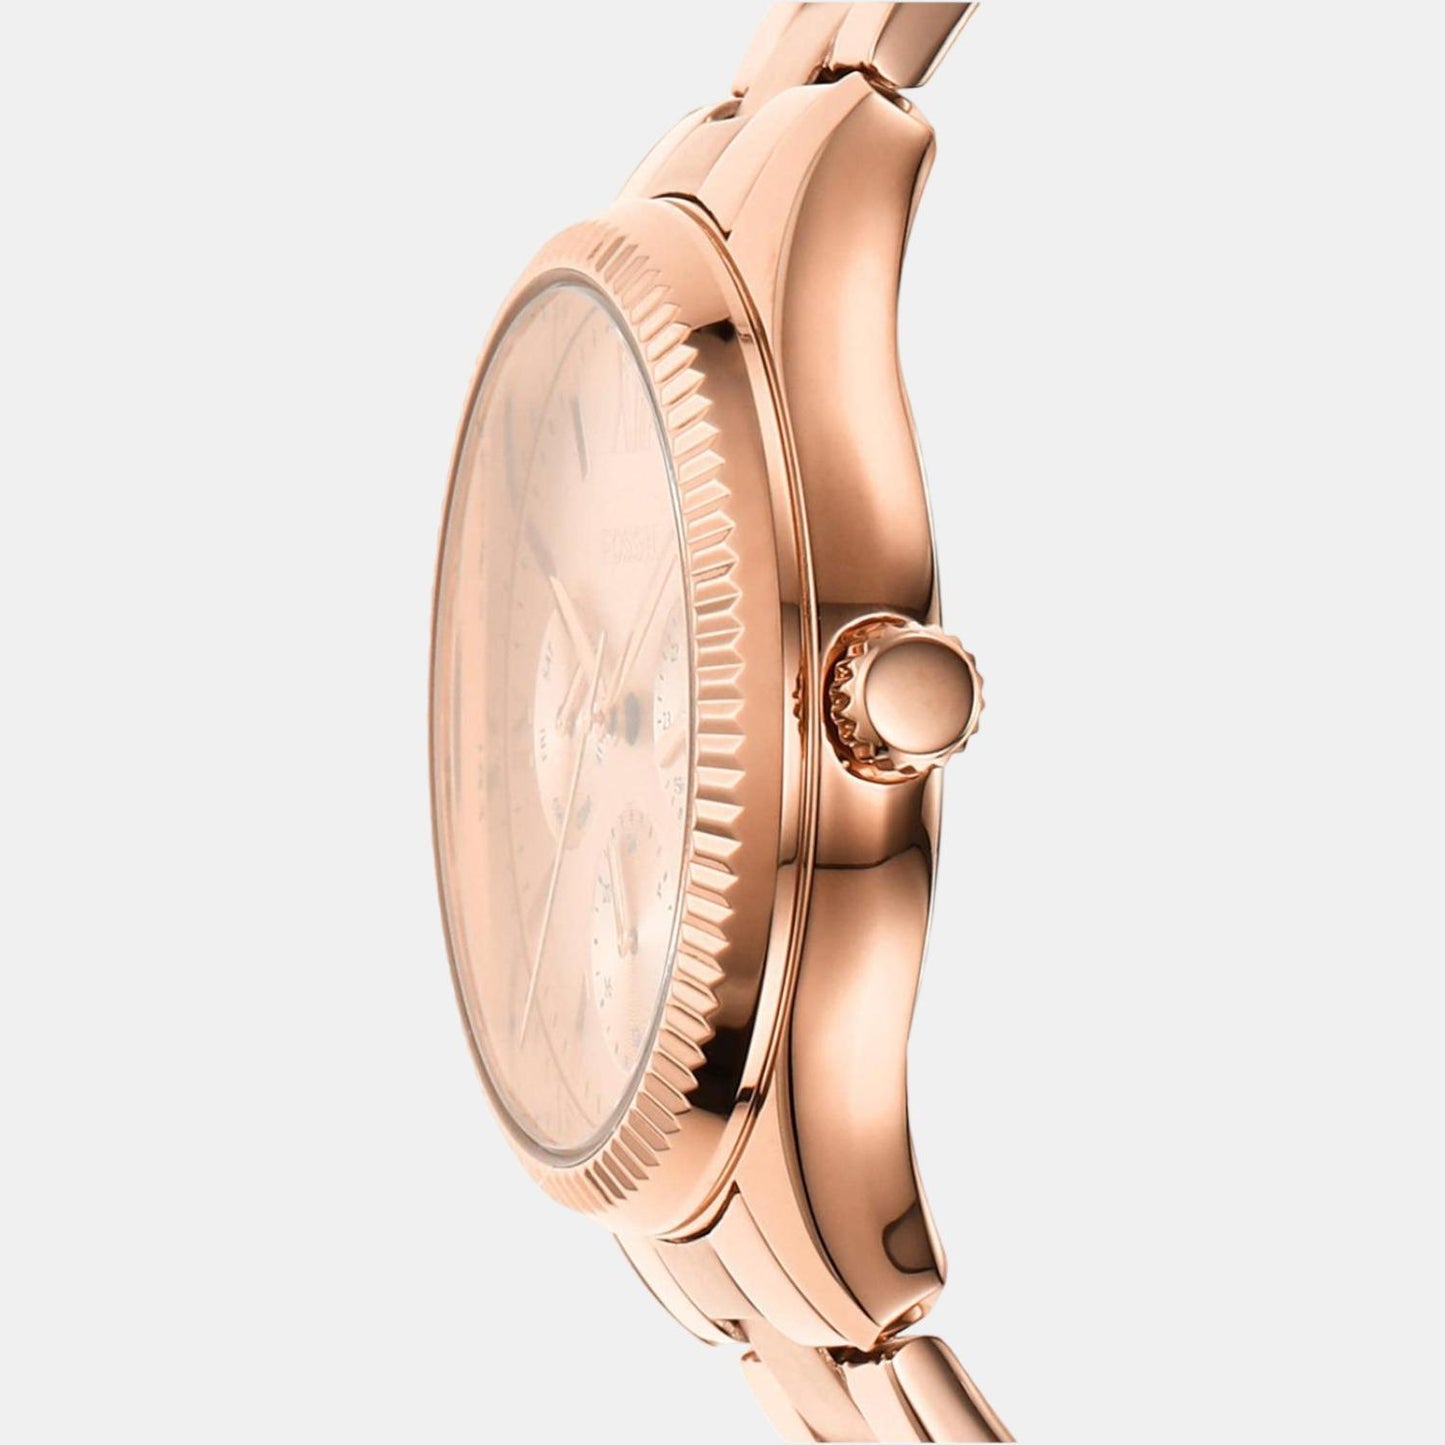 Female Rose Gold Stainless Steel Chronograph Watch BQ3691